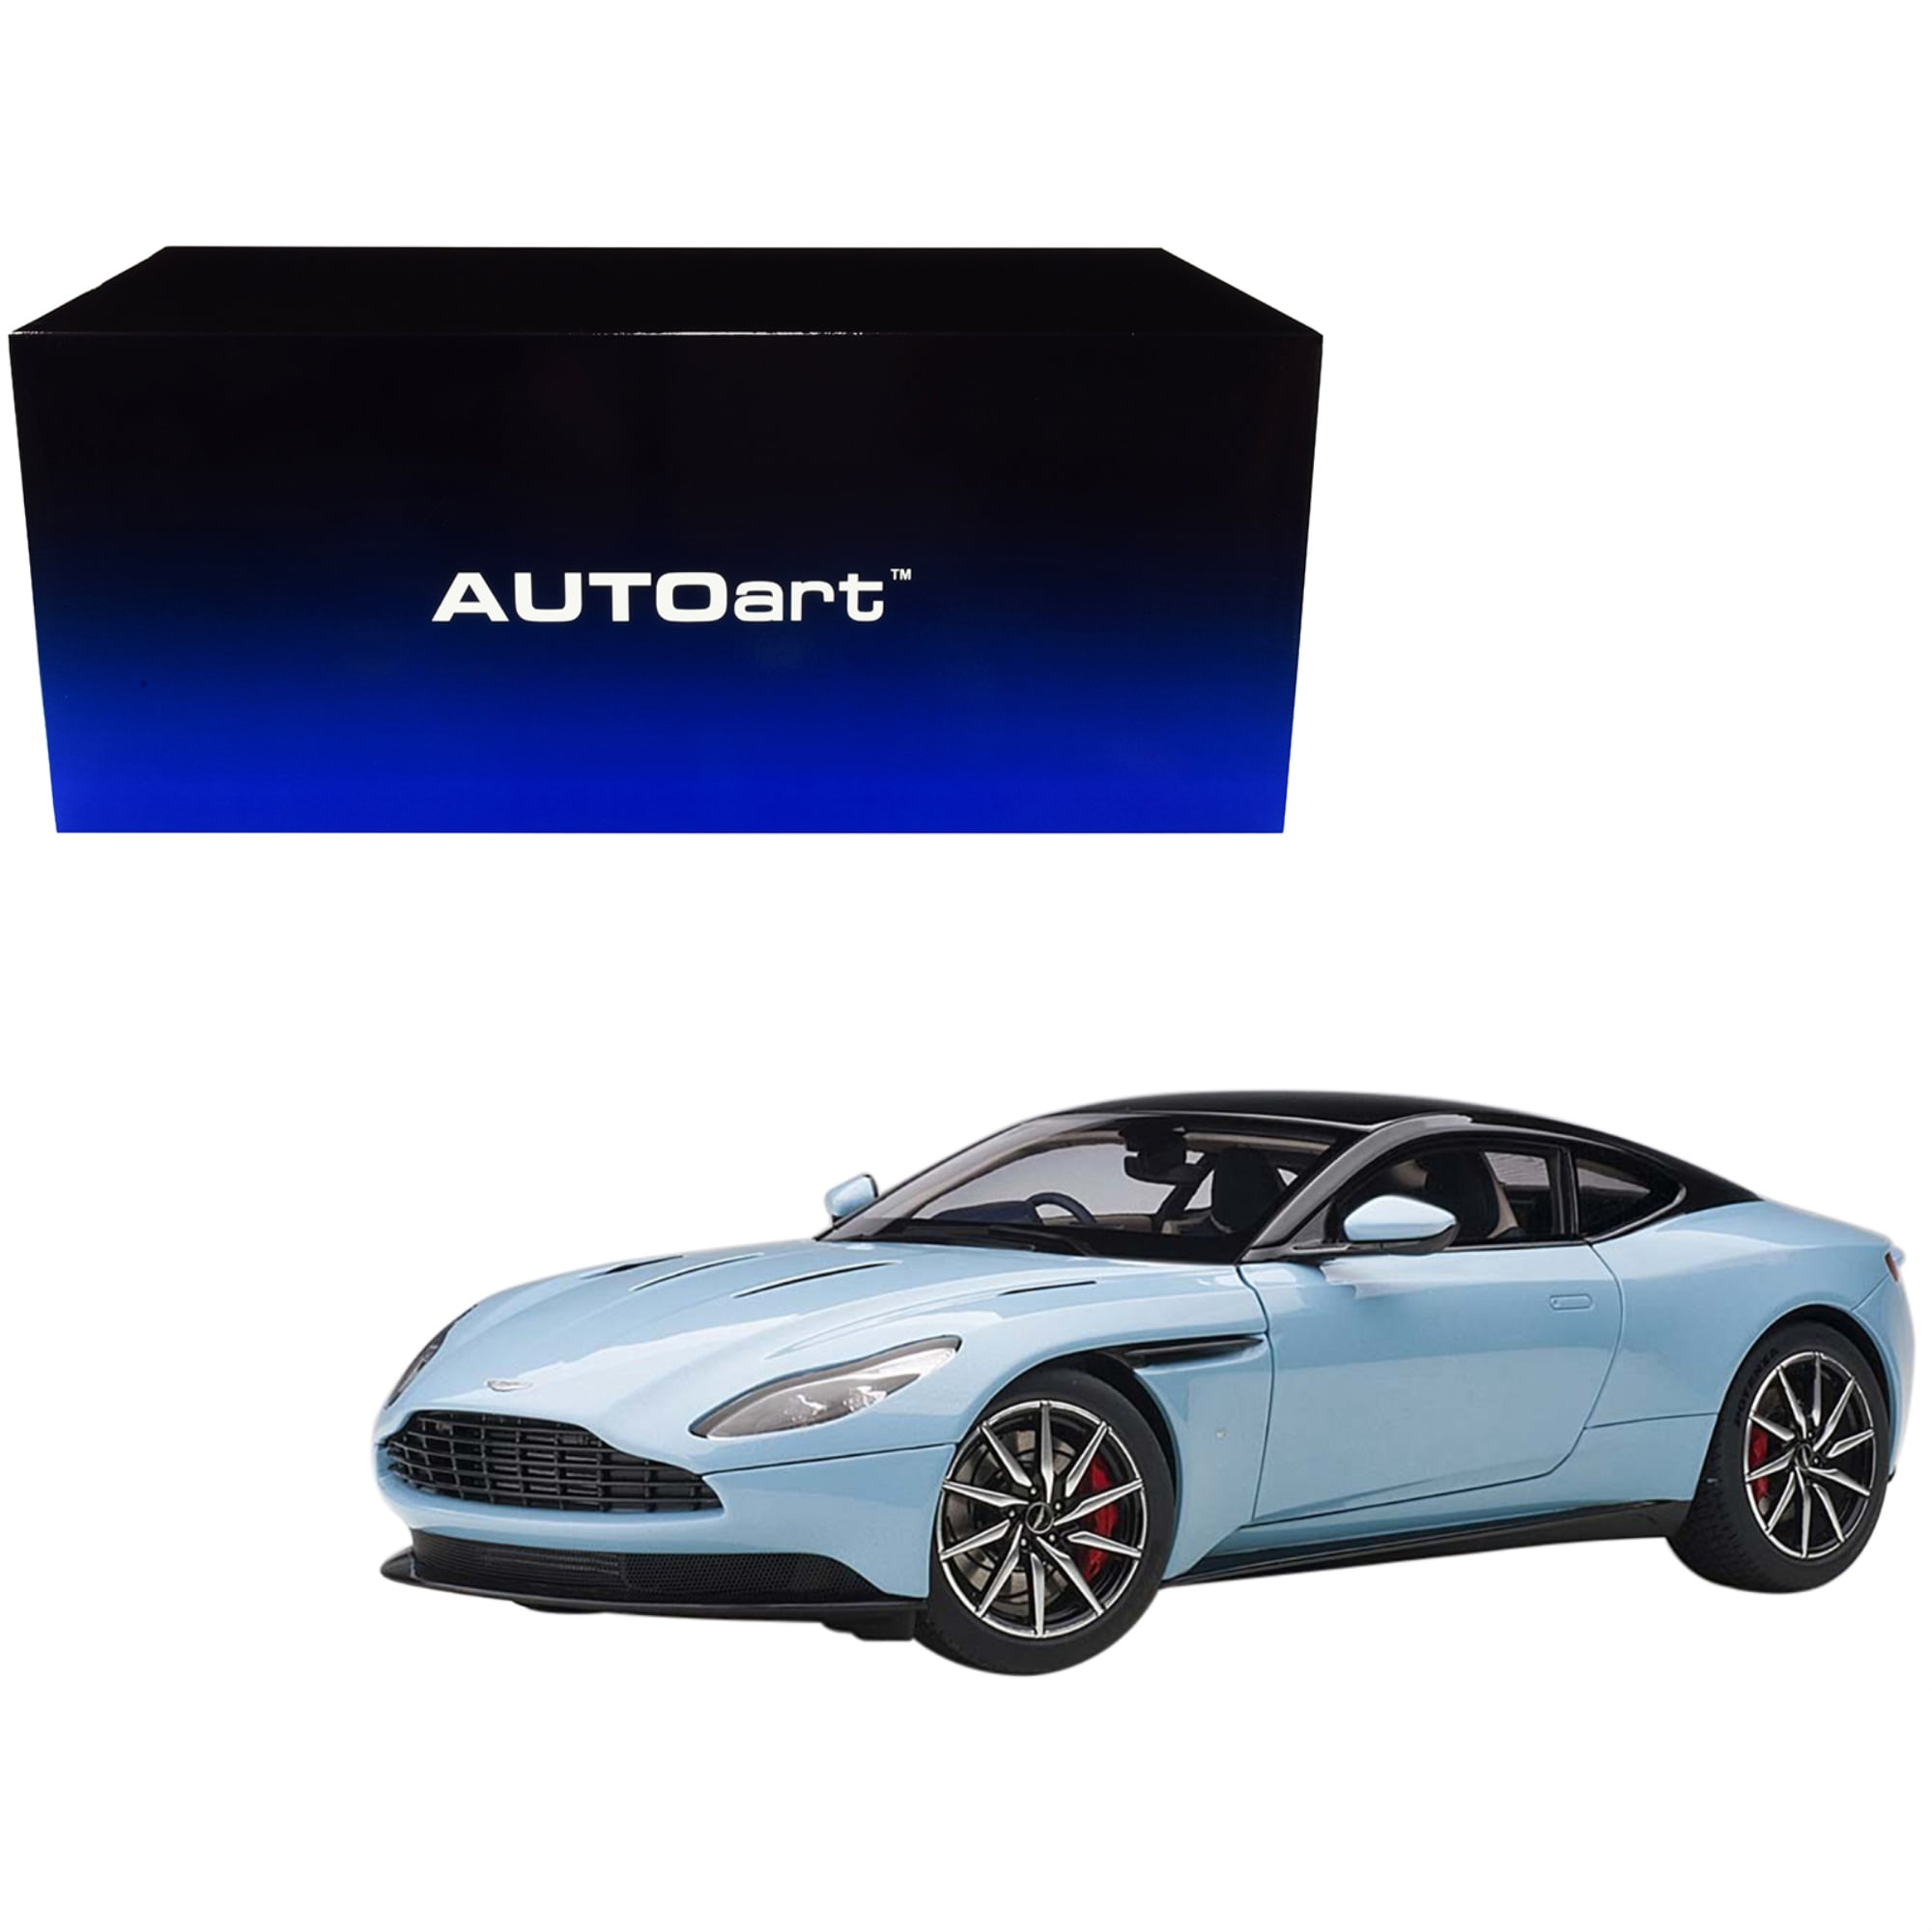 Picture of Autoart 70268 Aston Martin DB11 Q Frosted Glas Blue with Black Top 1 by 18 Scale Model Car